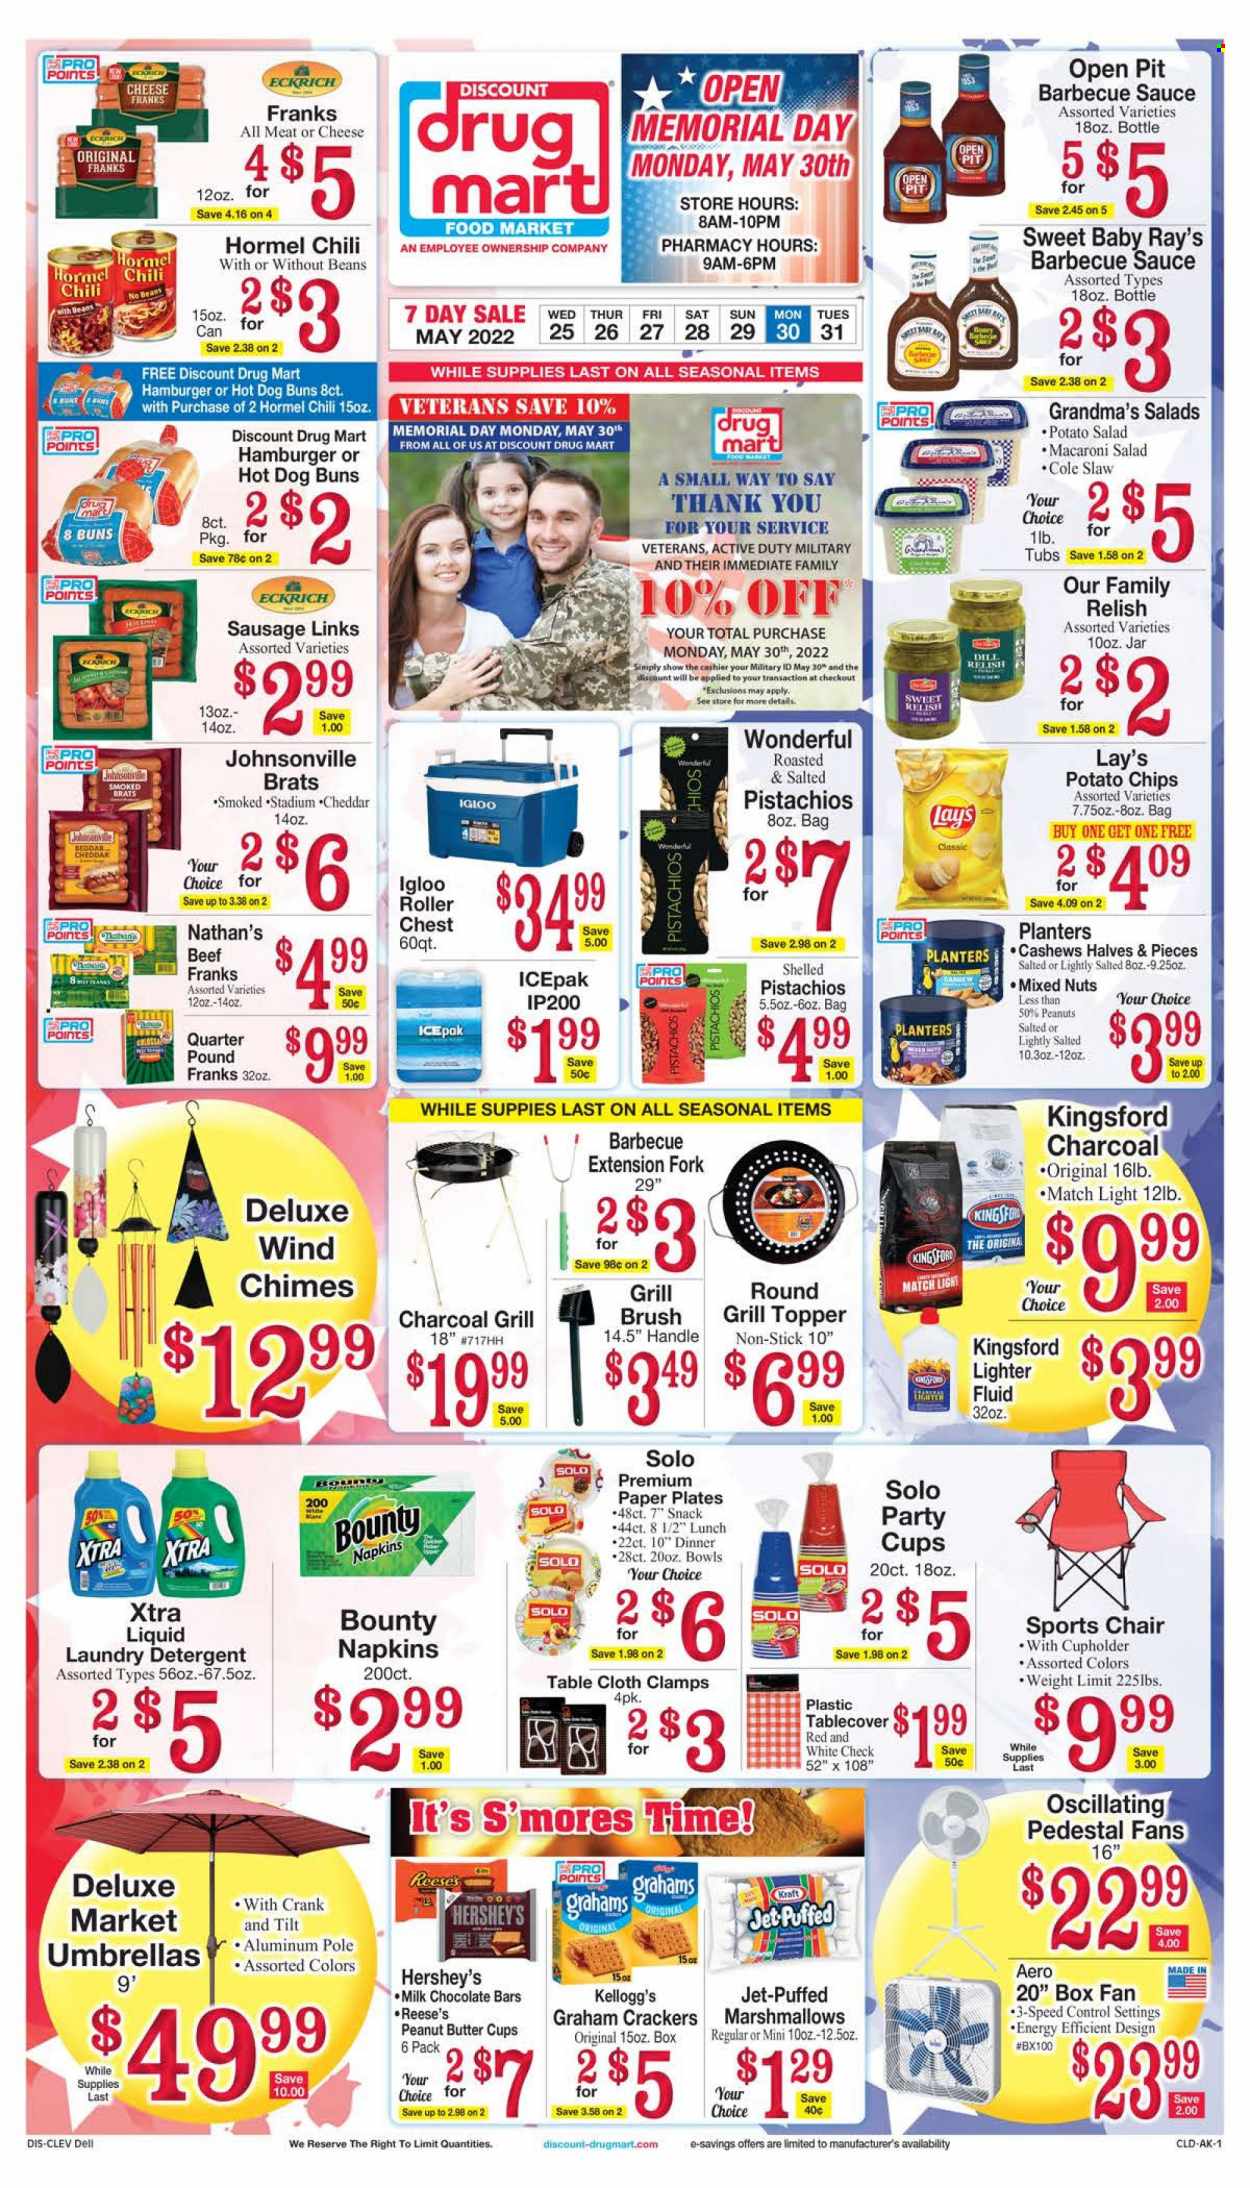 thumbnail - Discount Drug Mart Flyer - 05/25/2022 - 05/31/2022 - Sales products - buns, salad, sauce, Kraft®, Hormel, Johnsonville, sausage, potato salad, macaroni salad, Reese's, Hershey's, graham crackers, marshmallows, milk chocolate, snack, Bounty, crackers, Kellogg's, peanut butter cups, chocolate bar, potato chips, chips, Lay’s, dill, BBQ sauce, cashews, peanuts, pistachios, mixed nuts, Planters, napkins, detergent, laundry detergent, XTRA, Jet, brush, fork, plate, paper, paper plate, party cups, chimes, tablecloth, roller. Page 1.